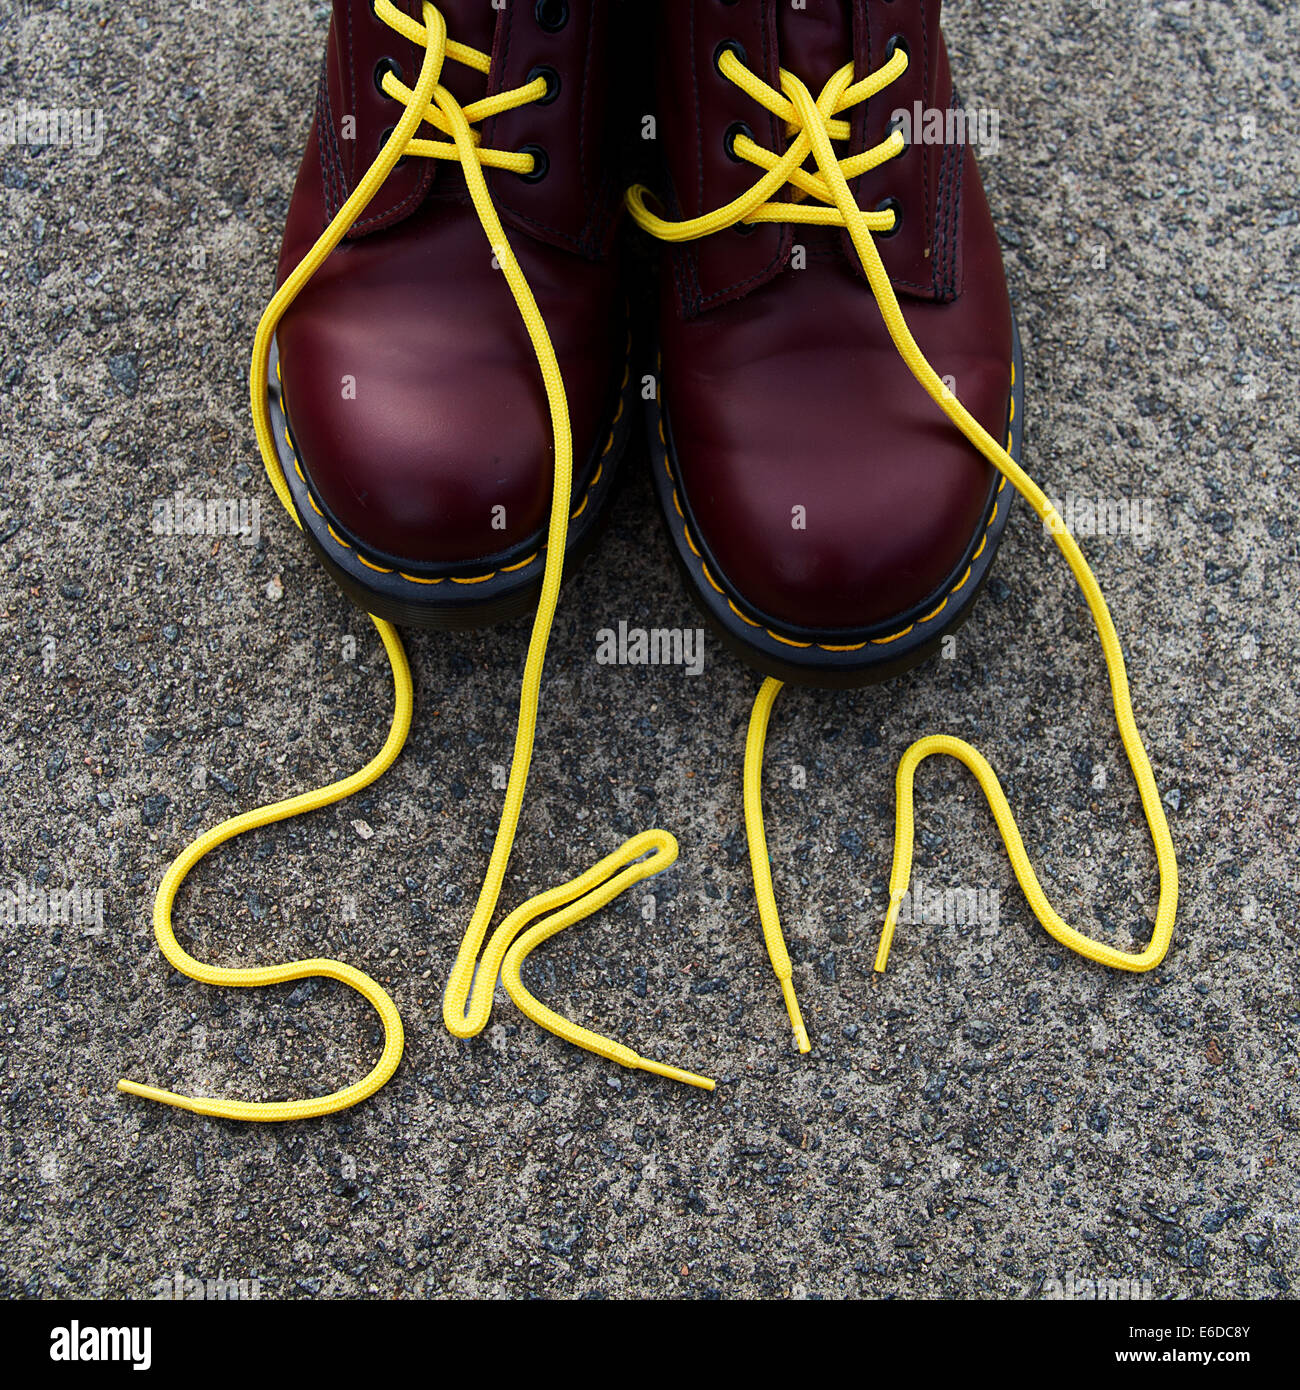 Red Dr Martens boots with yellow laces spelling Skin on paving stone Stock Photo